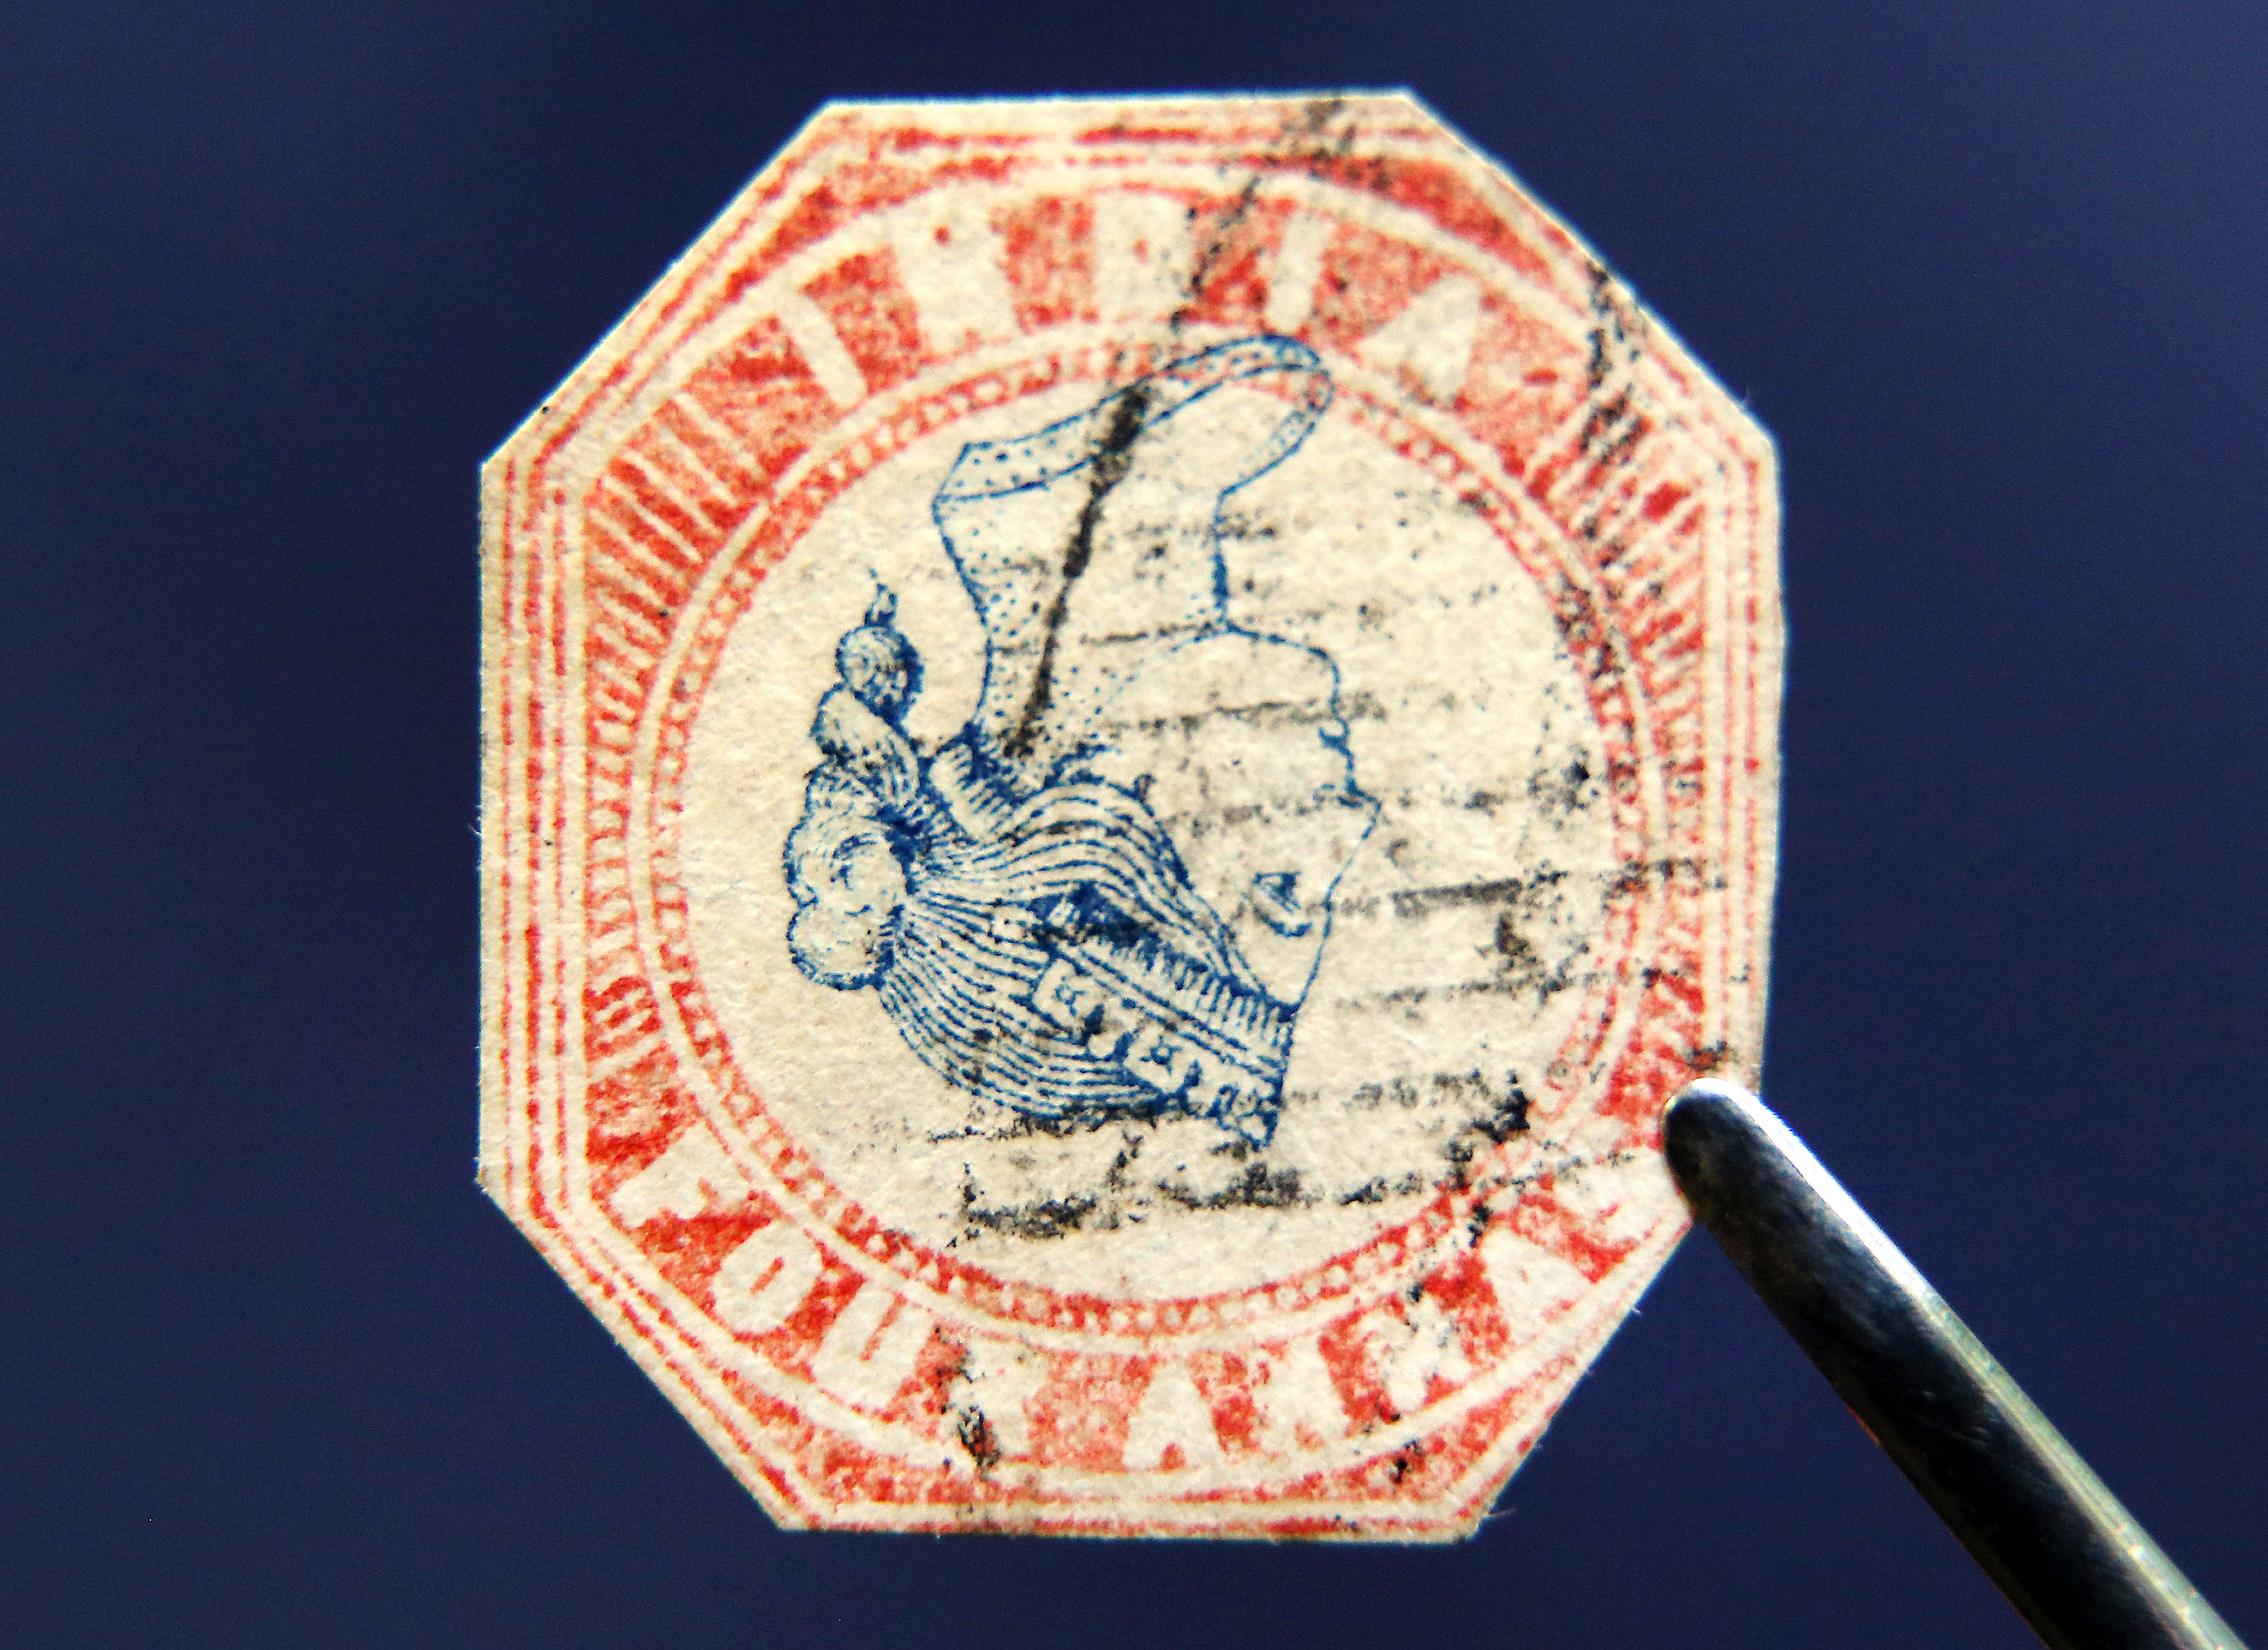 World's most sought after stamp - Photo 1 - Pictures - CBS News3000 x 2182